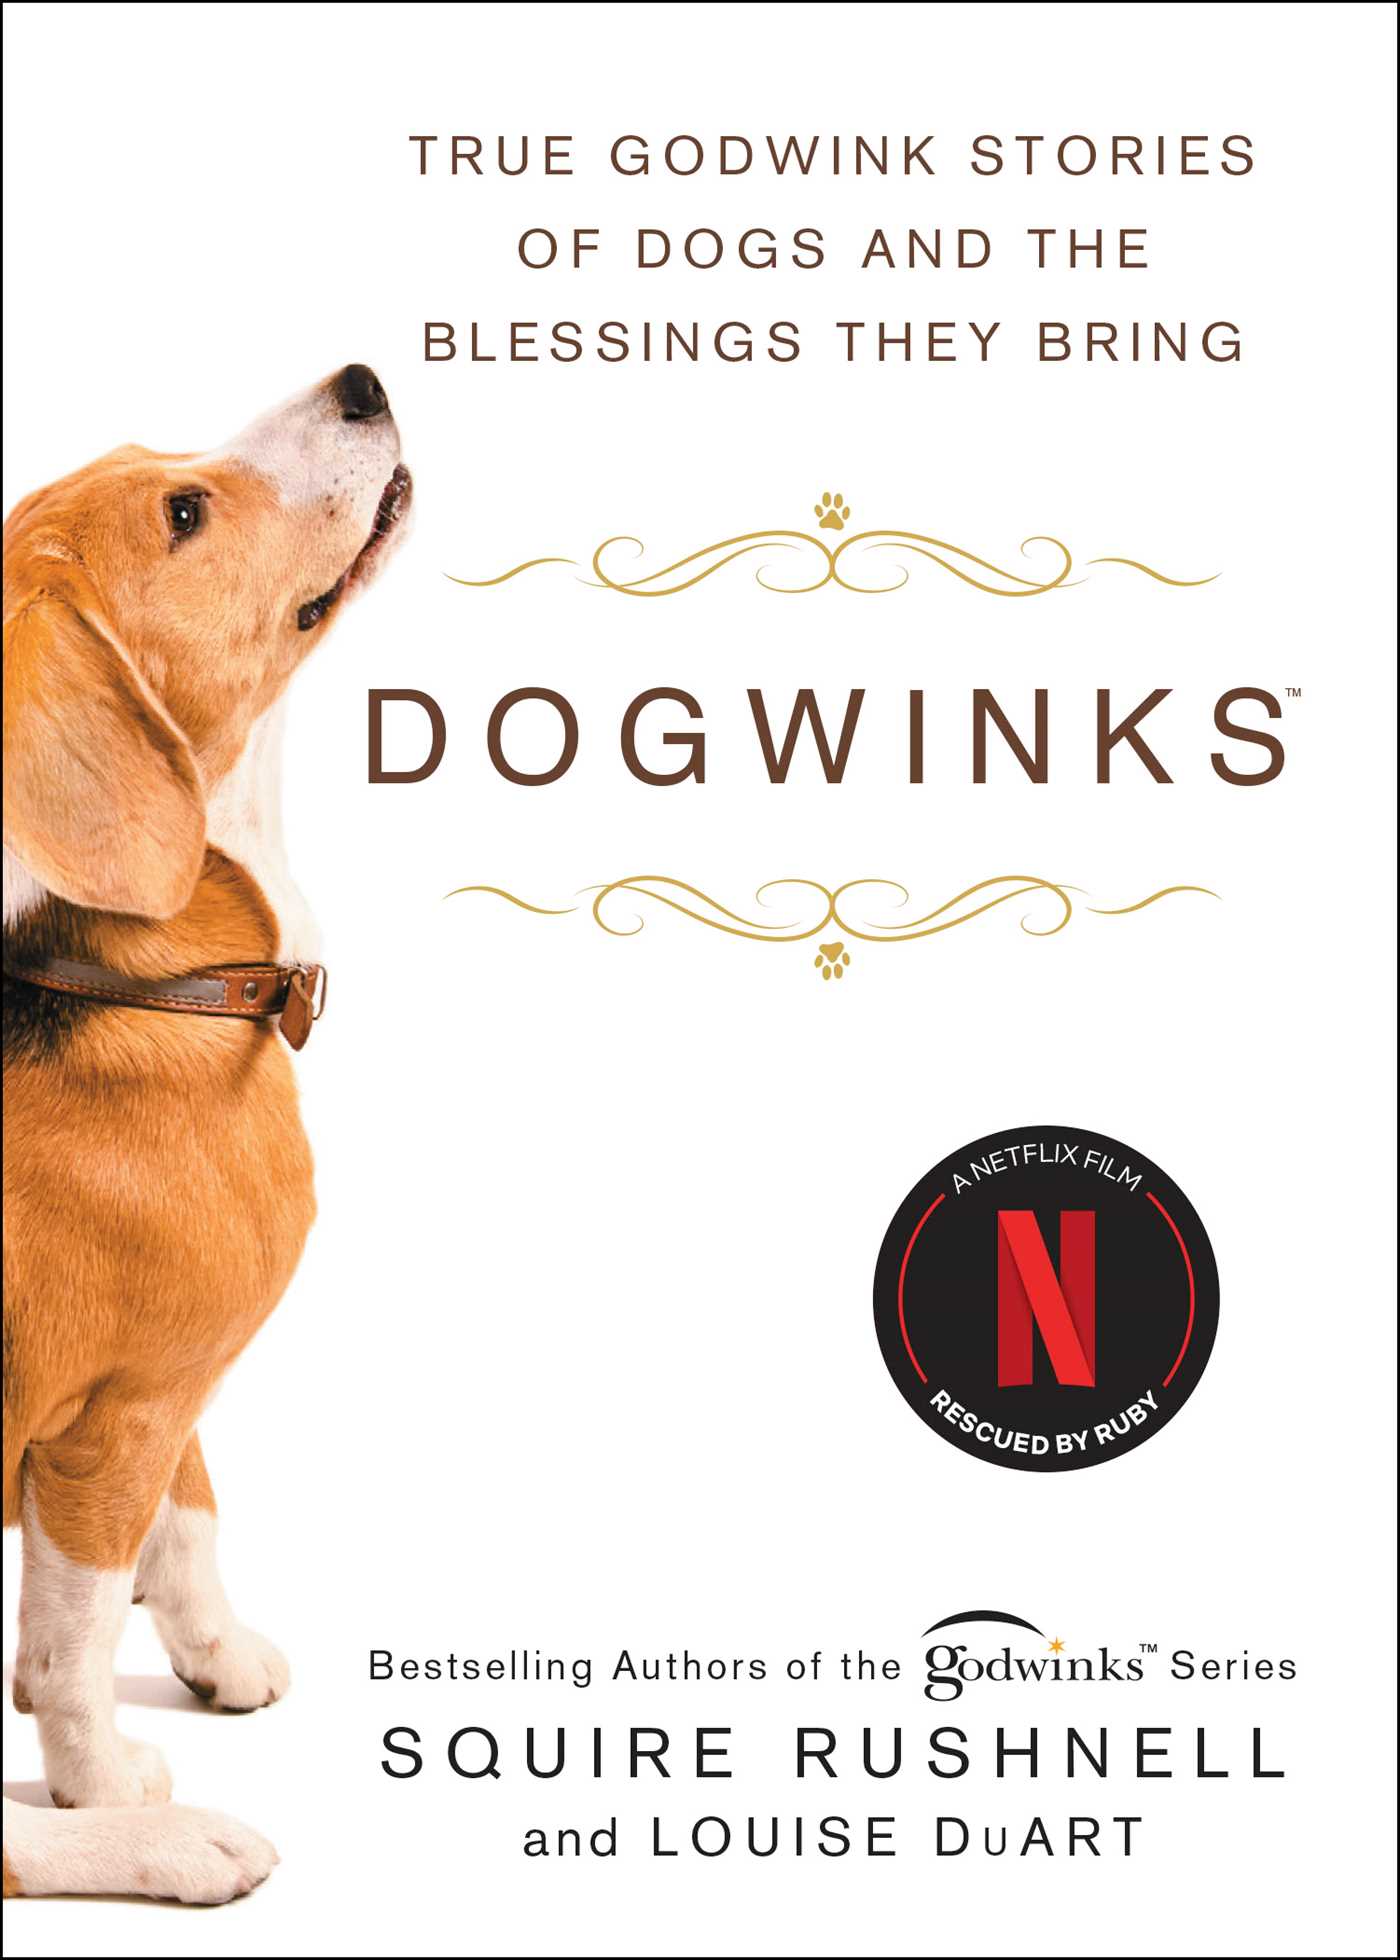 DOGWINKS: TRUE GODWINK STORIES OF DOGS AND THE BLESSINGS THEY BRING (THE GODWINK SERIES)